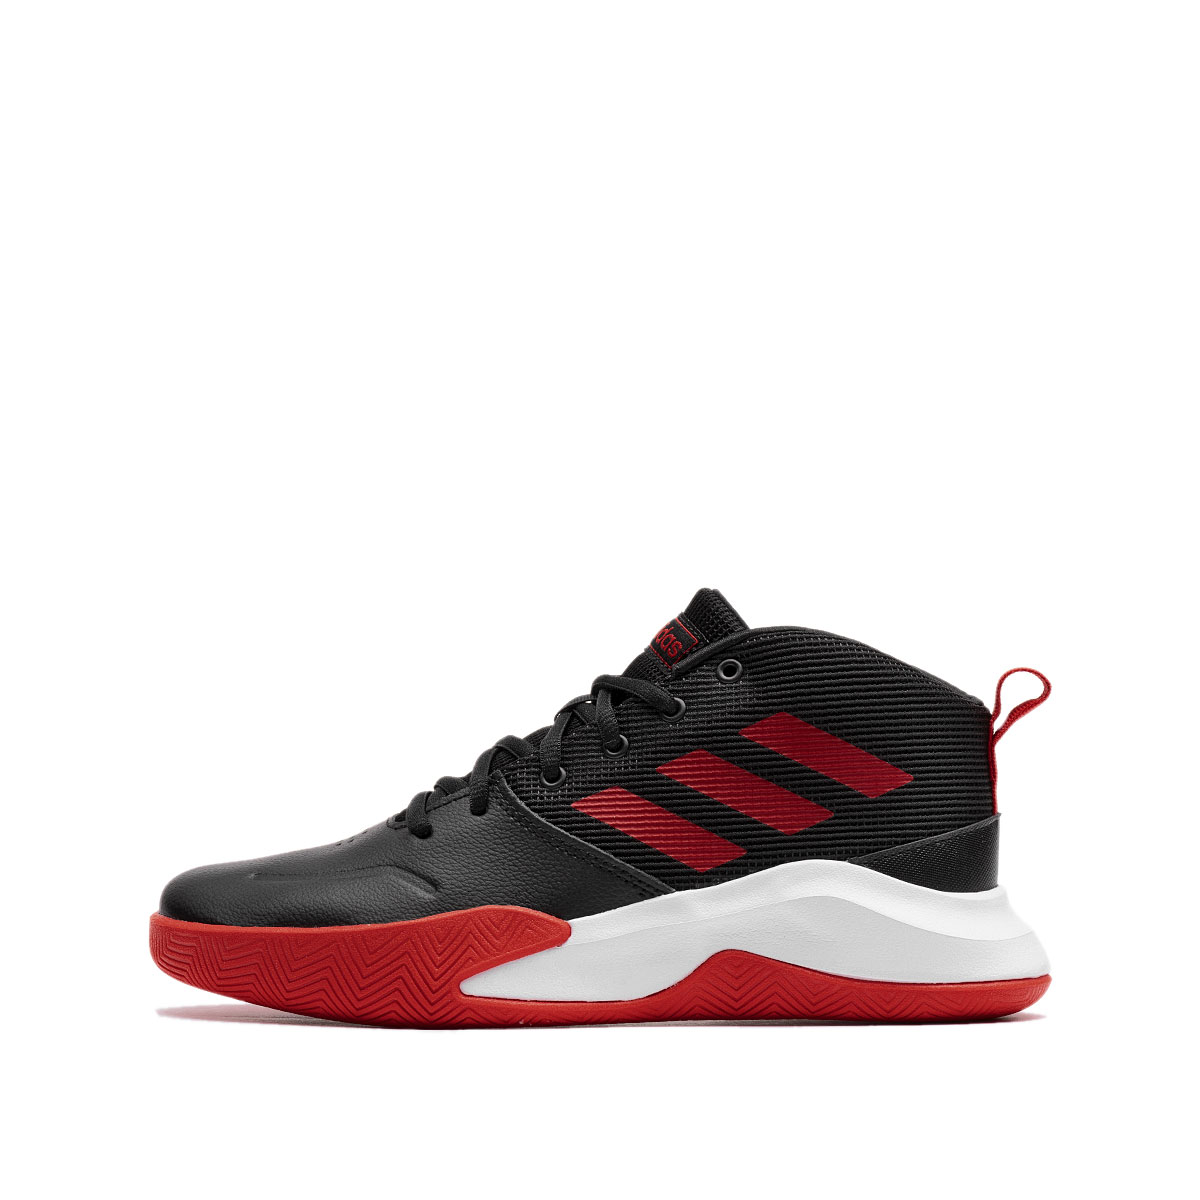 adidas Ownthegame Wide  EF0309